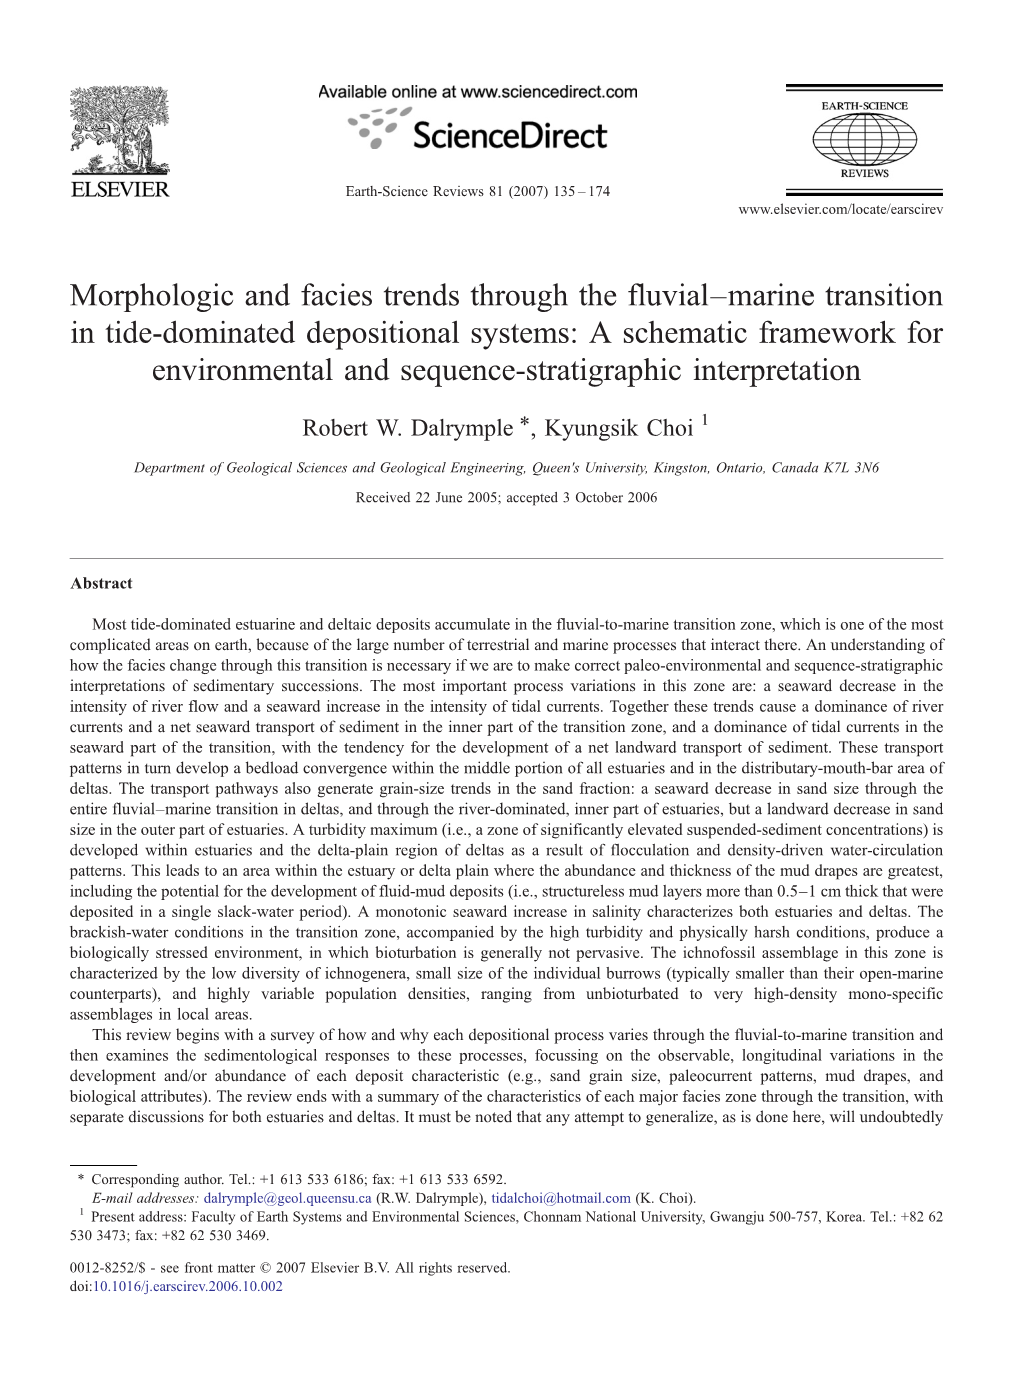 Morphologic and Facies Trends Through the Fluvial–Marine Transition in Tide